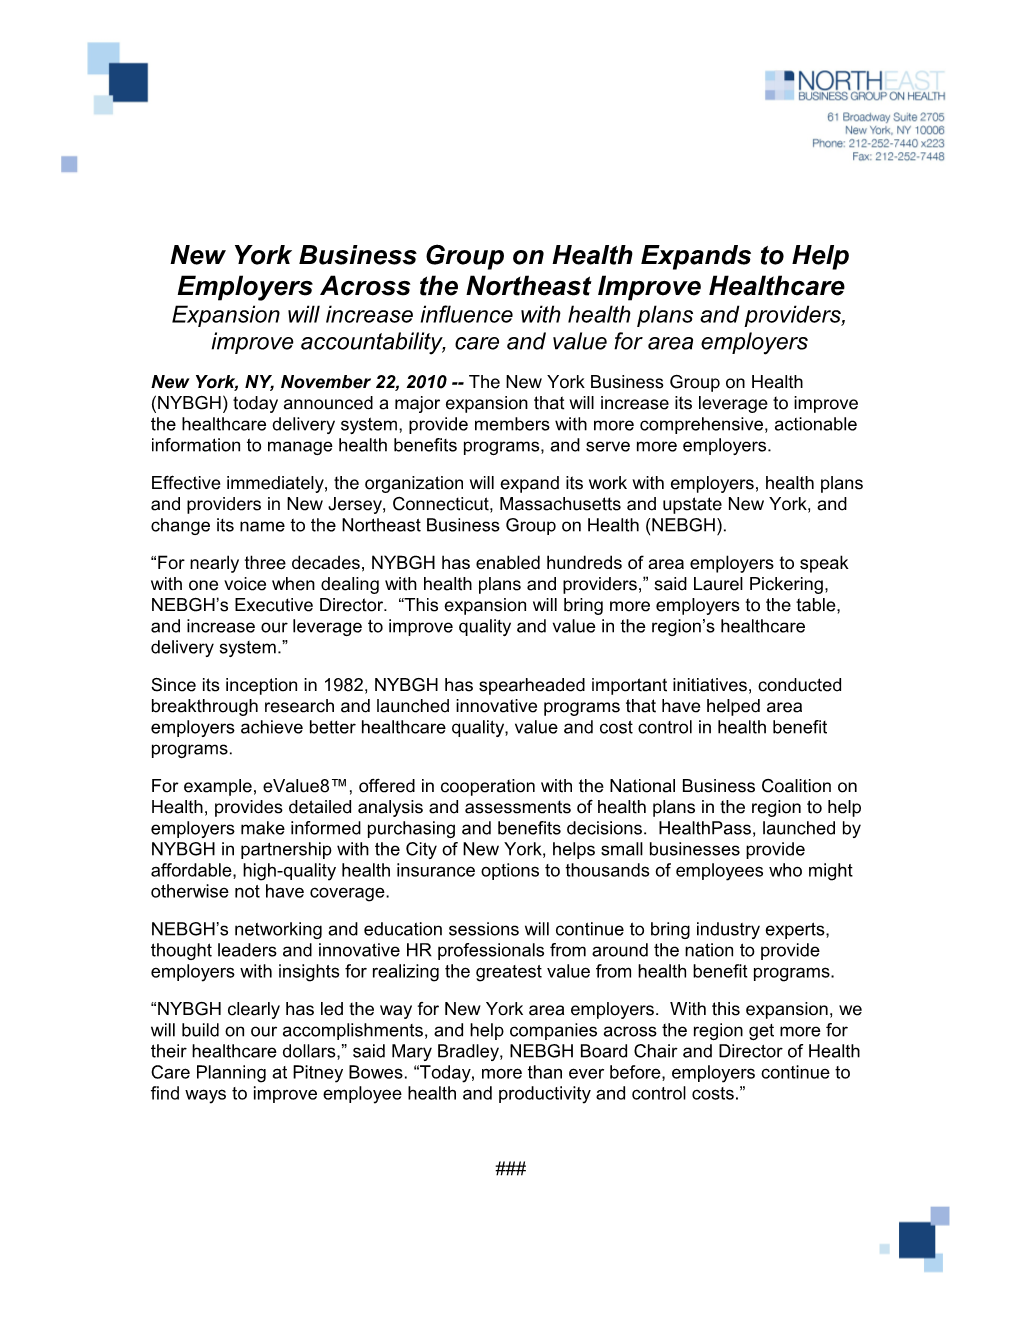 New York Business Group on Health Expands to Help Employers Across the Northeast Improve